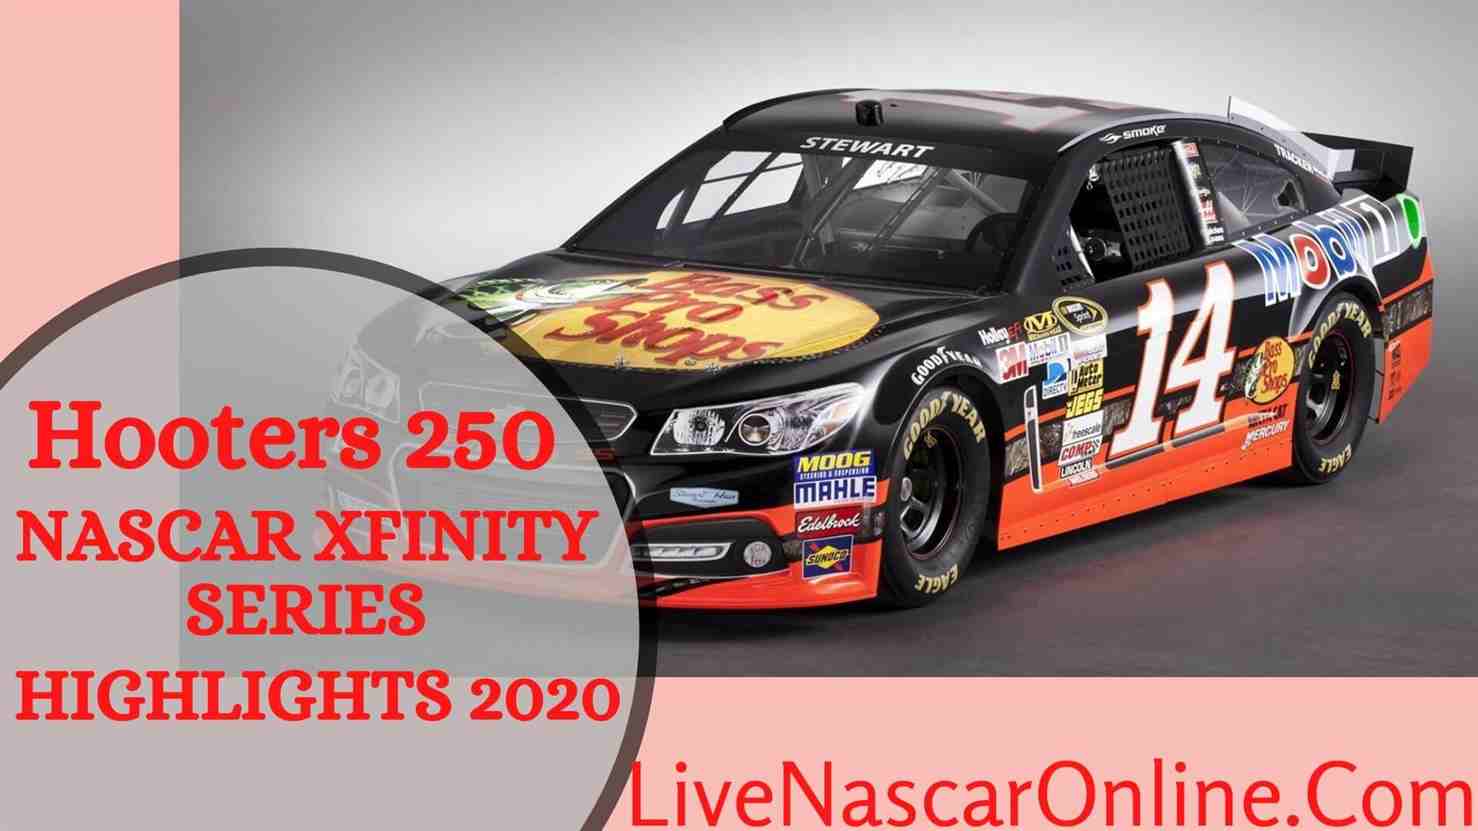 Highlights 2020 Hooters 250